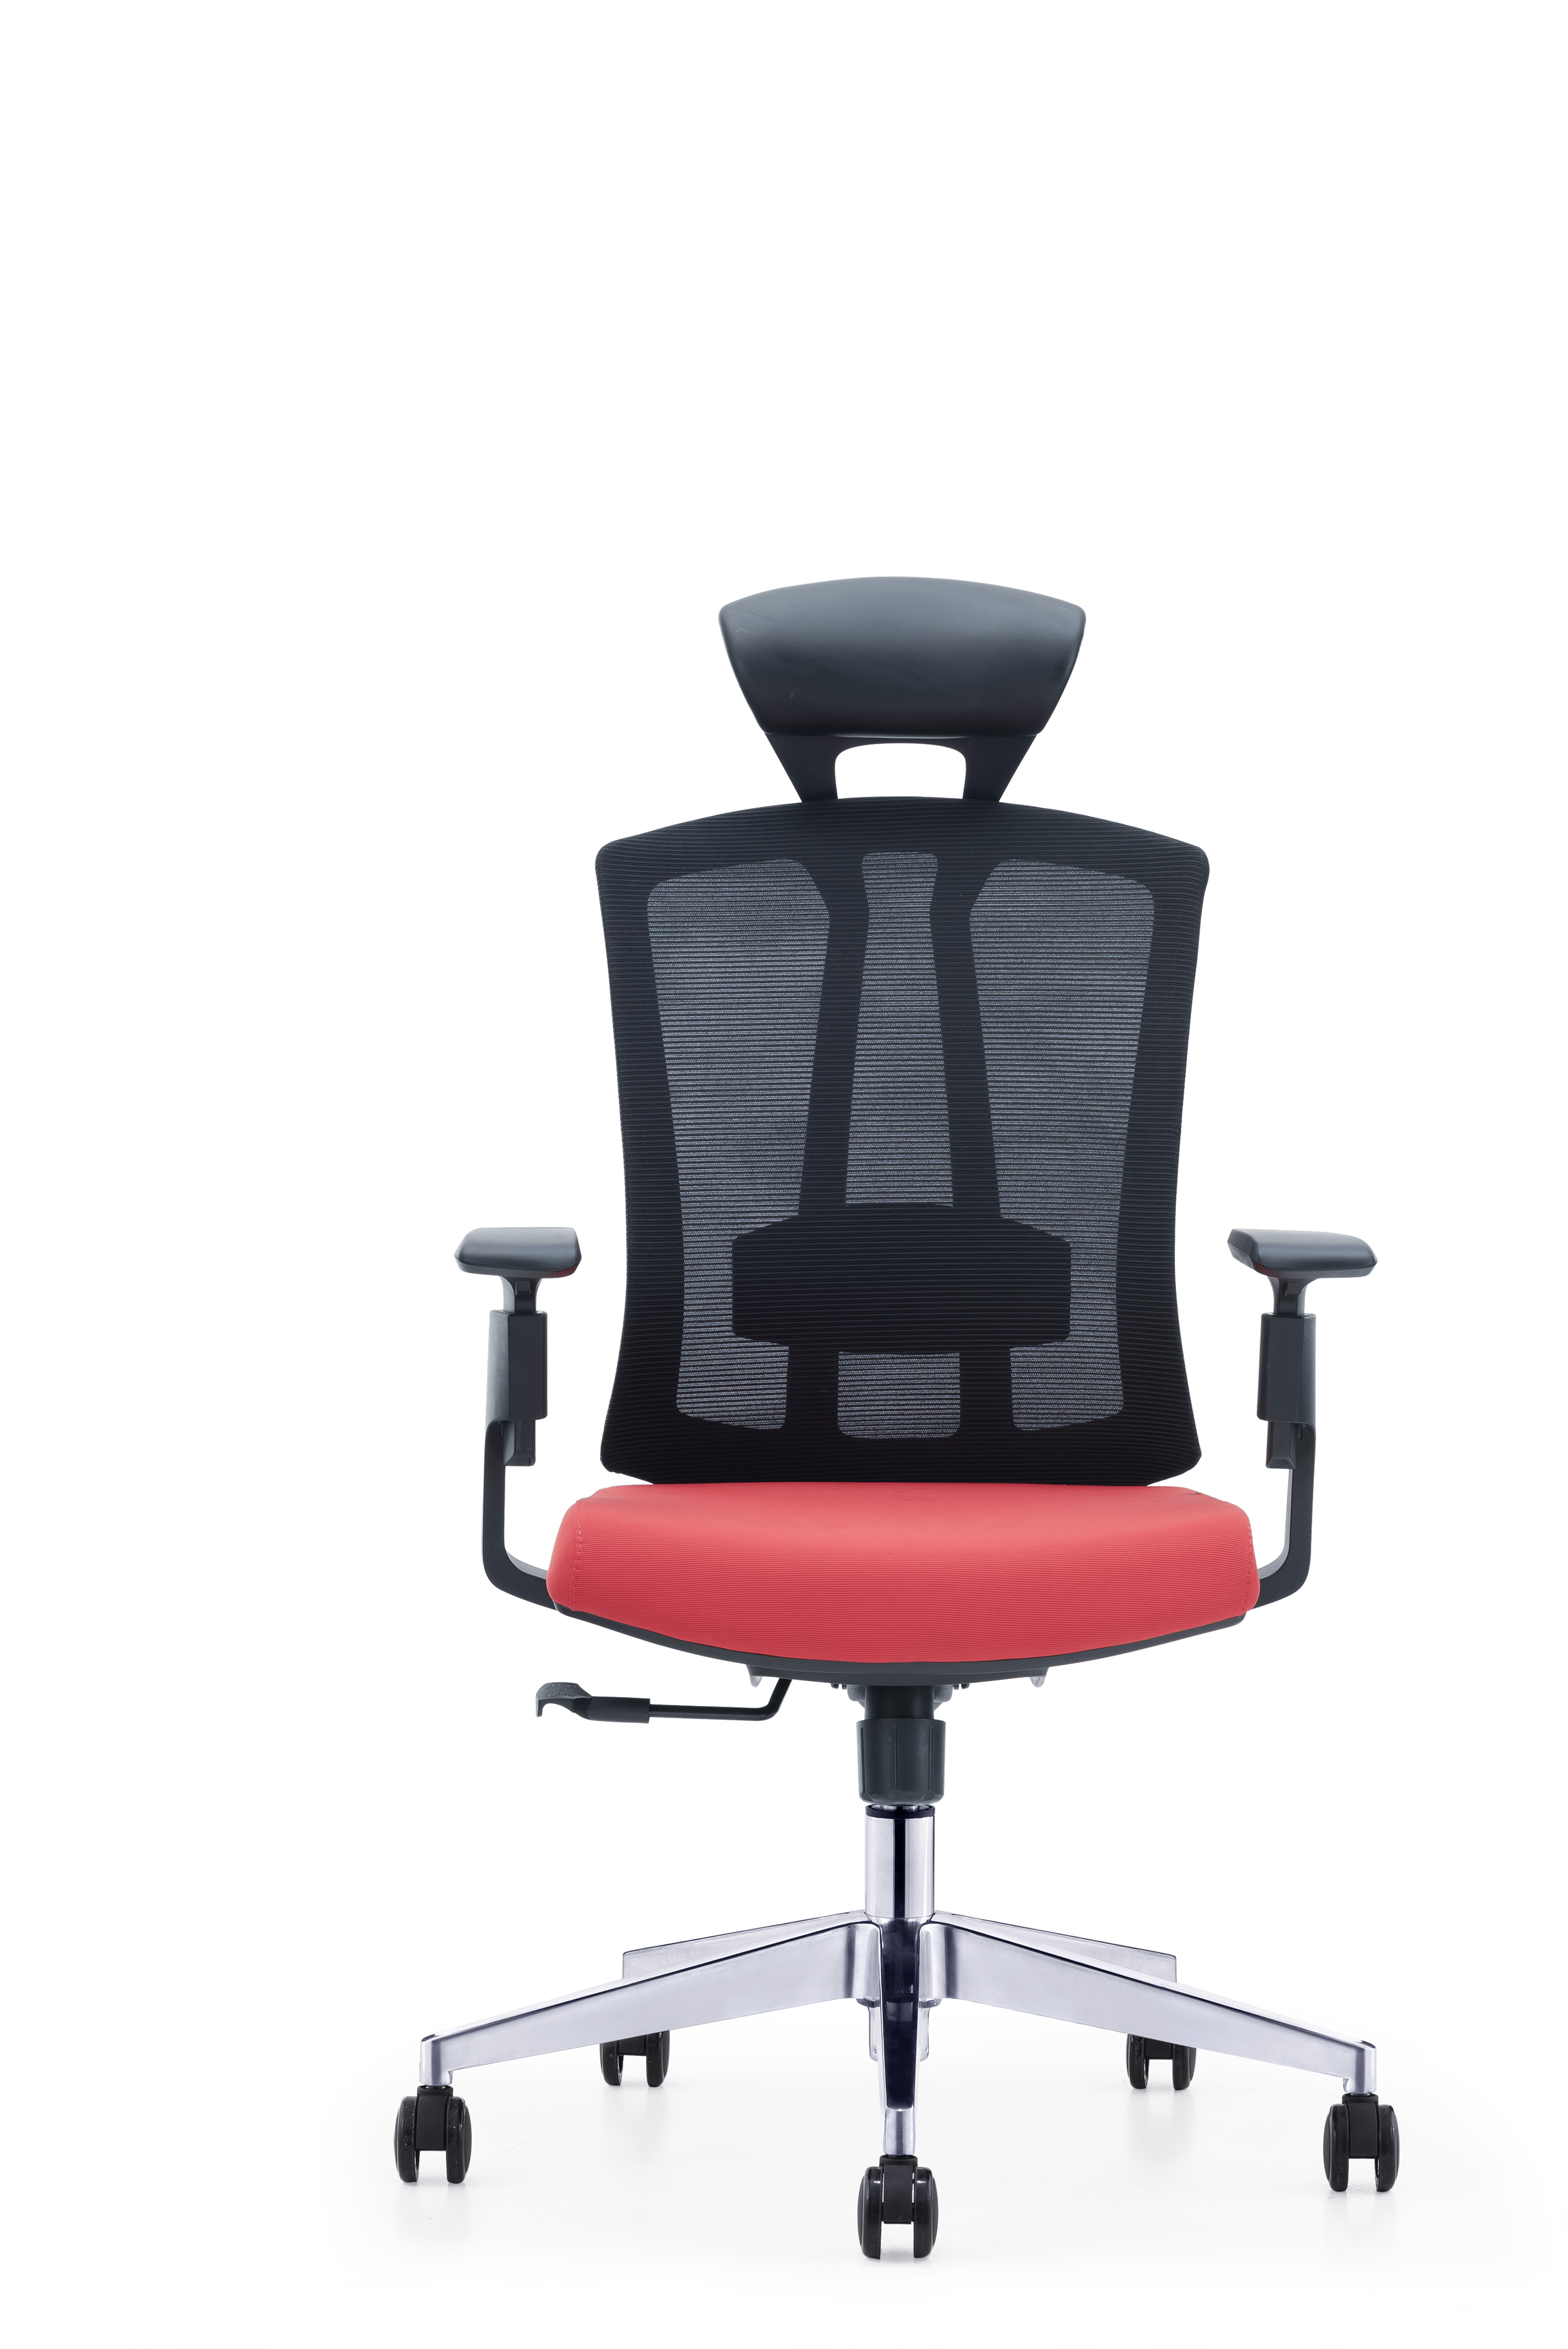 Hot New Products Black Mesh Office Chair - CH-267A – SitZone